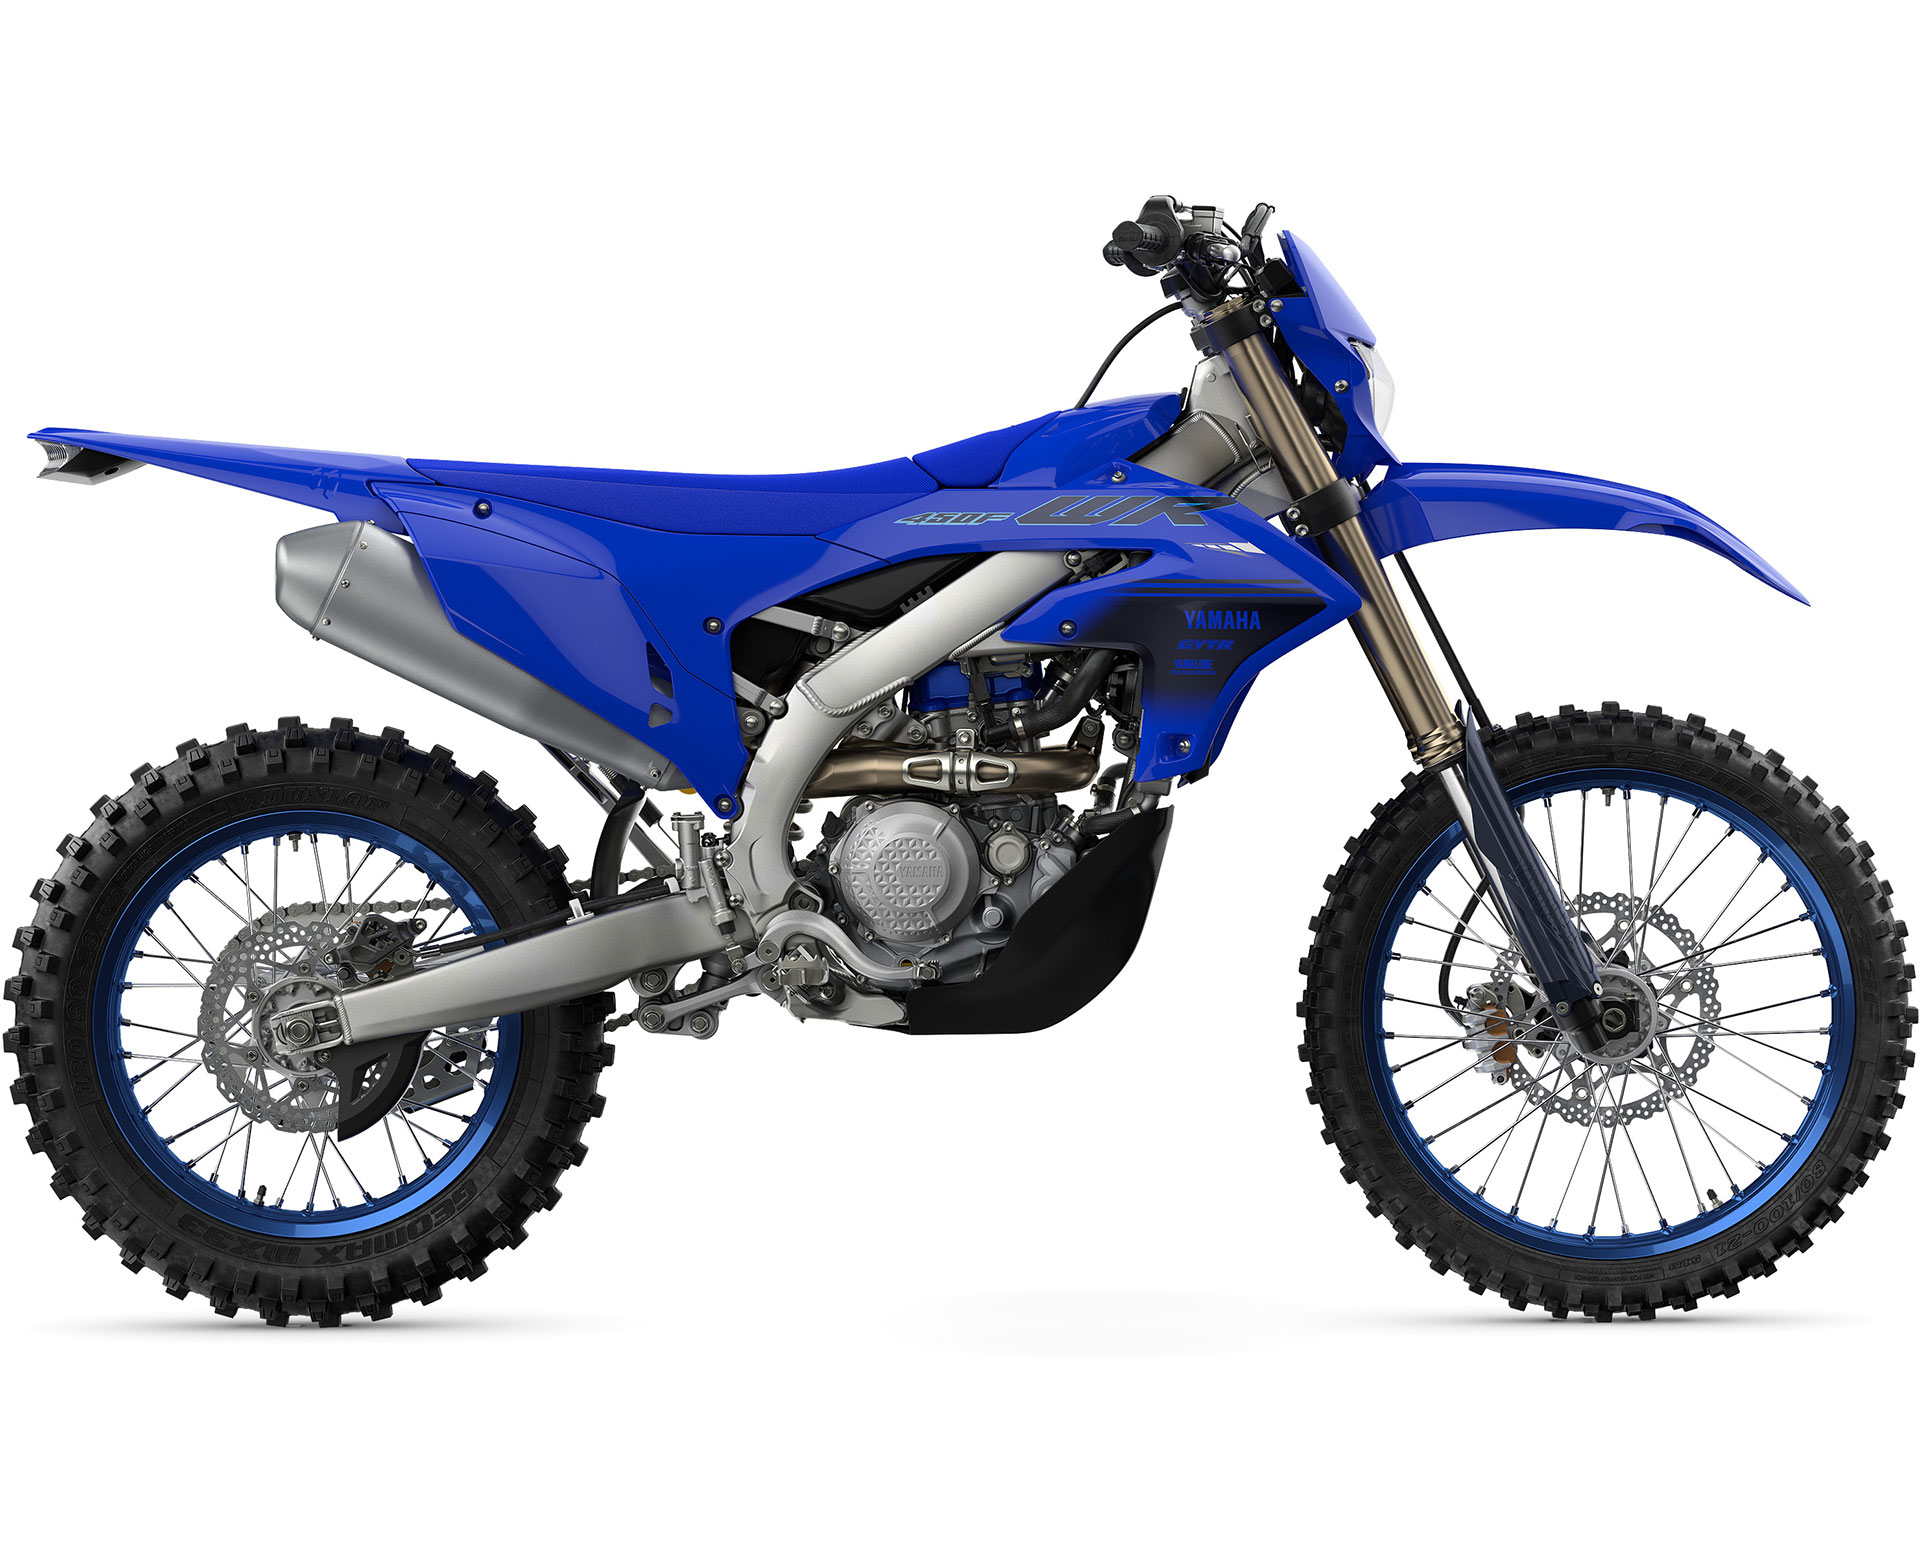 Thumbnail of your customized WR450F 2024